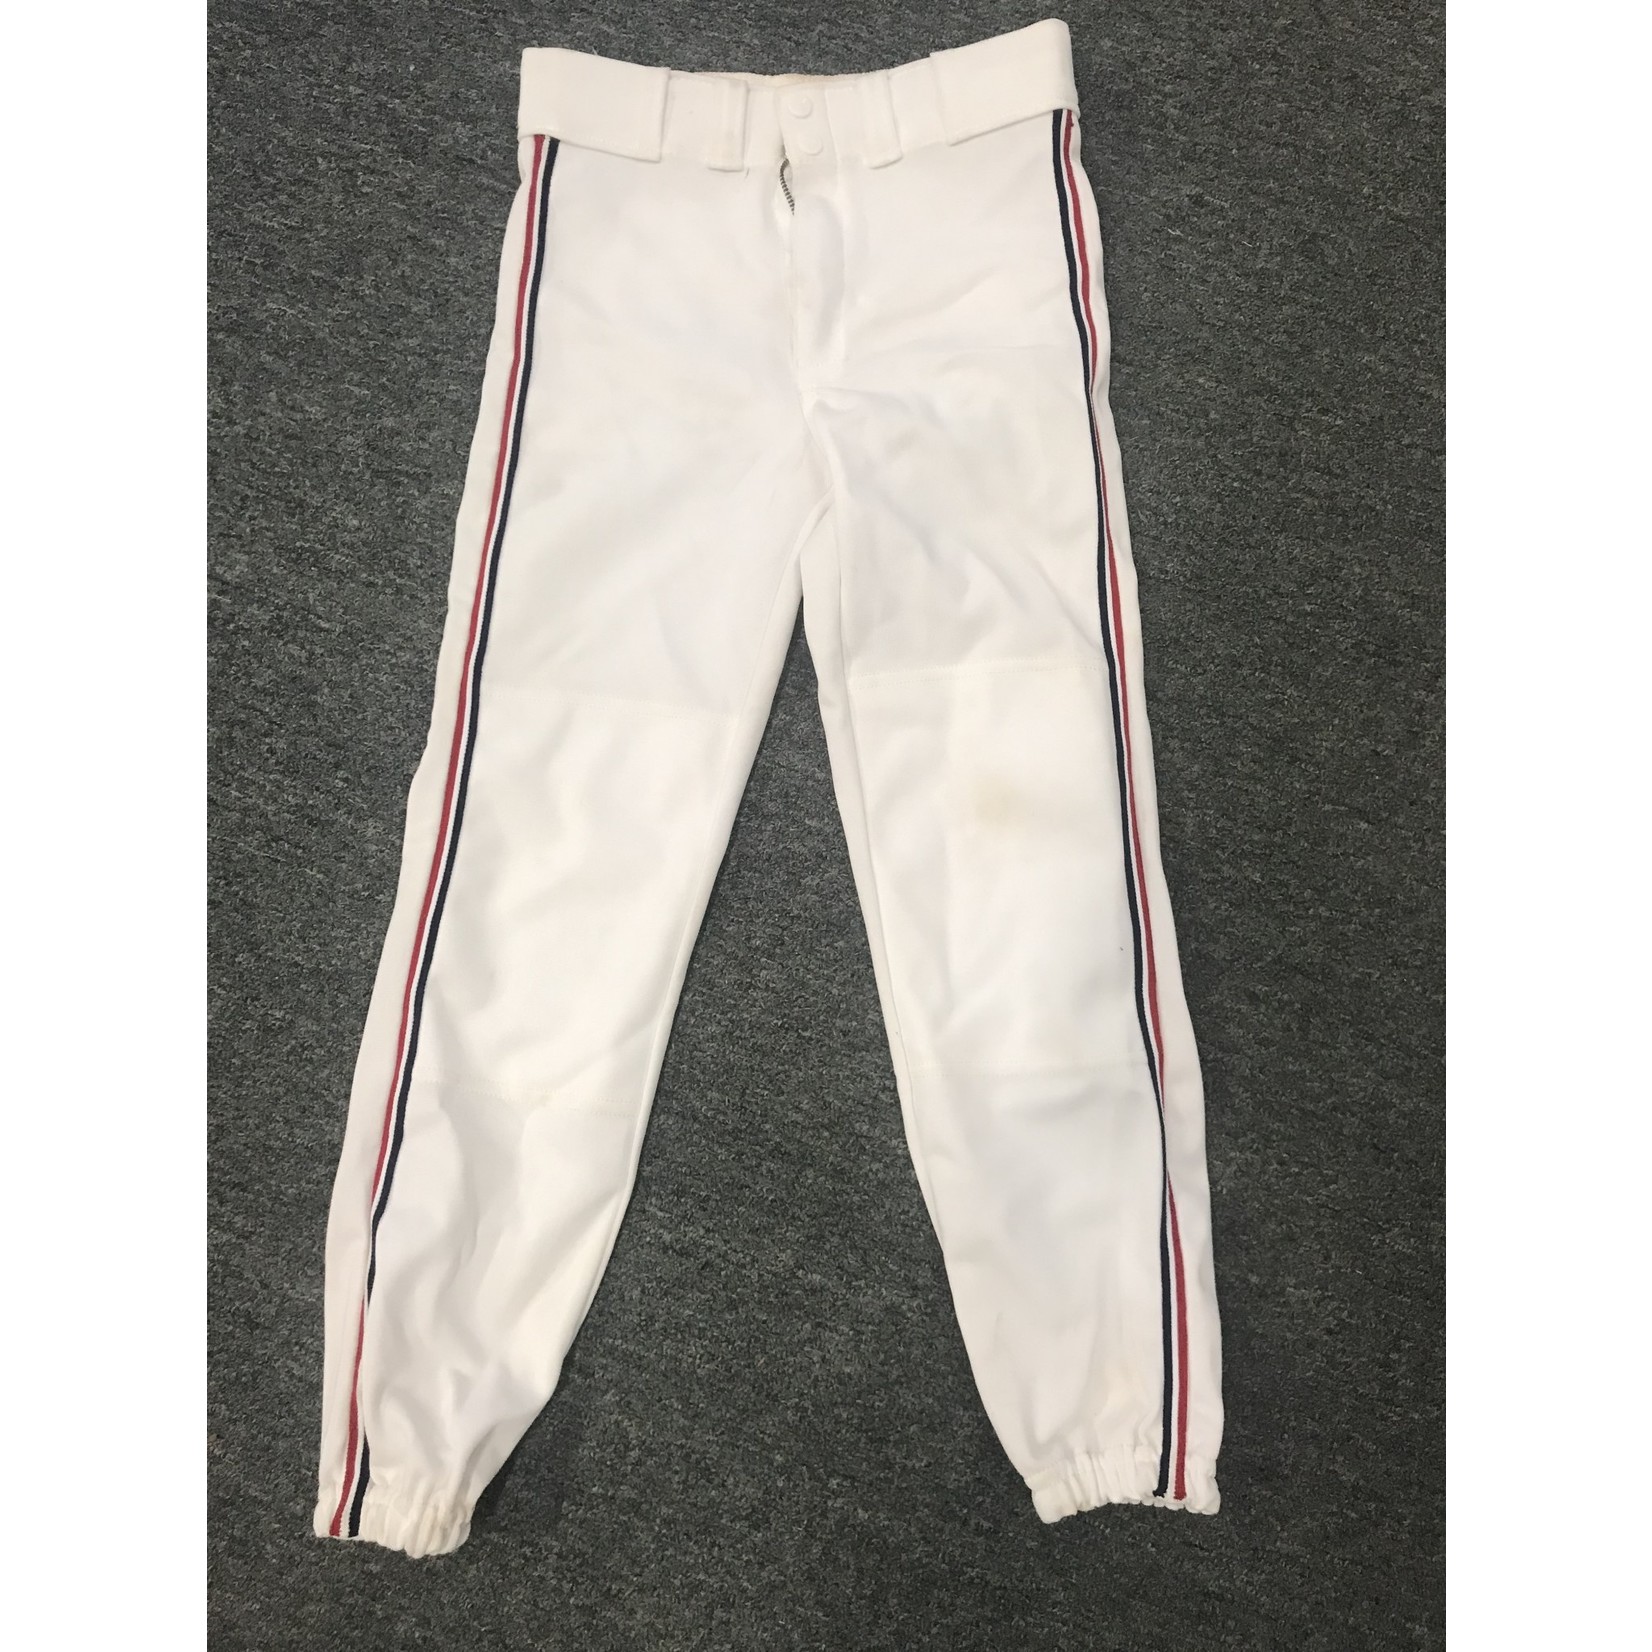 Rawlings Stained Rawlings Youth Medium Sample Pants Used for Team Sizing Samples (DISCOUNT)